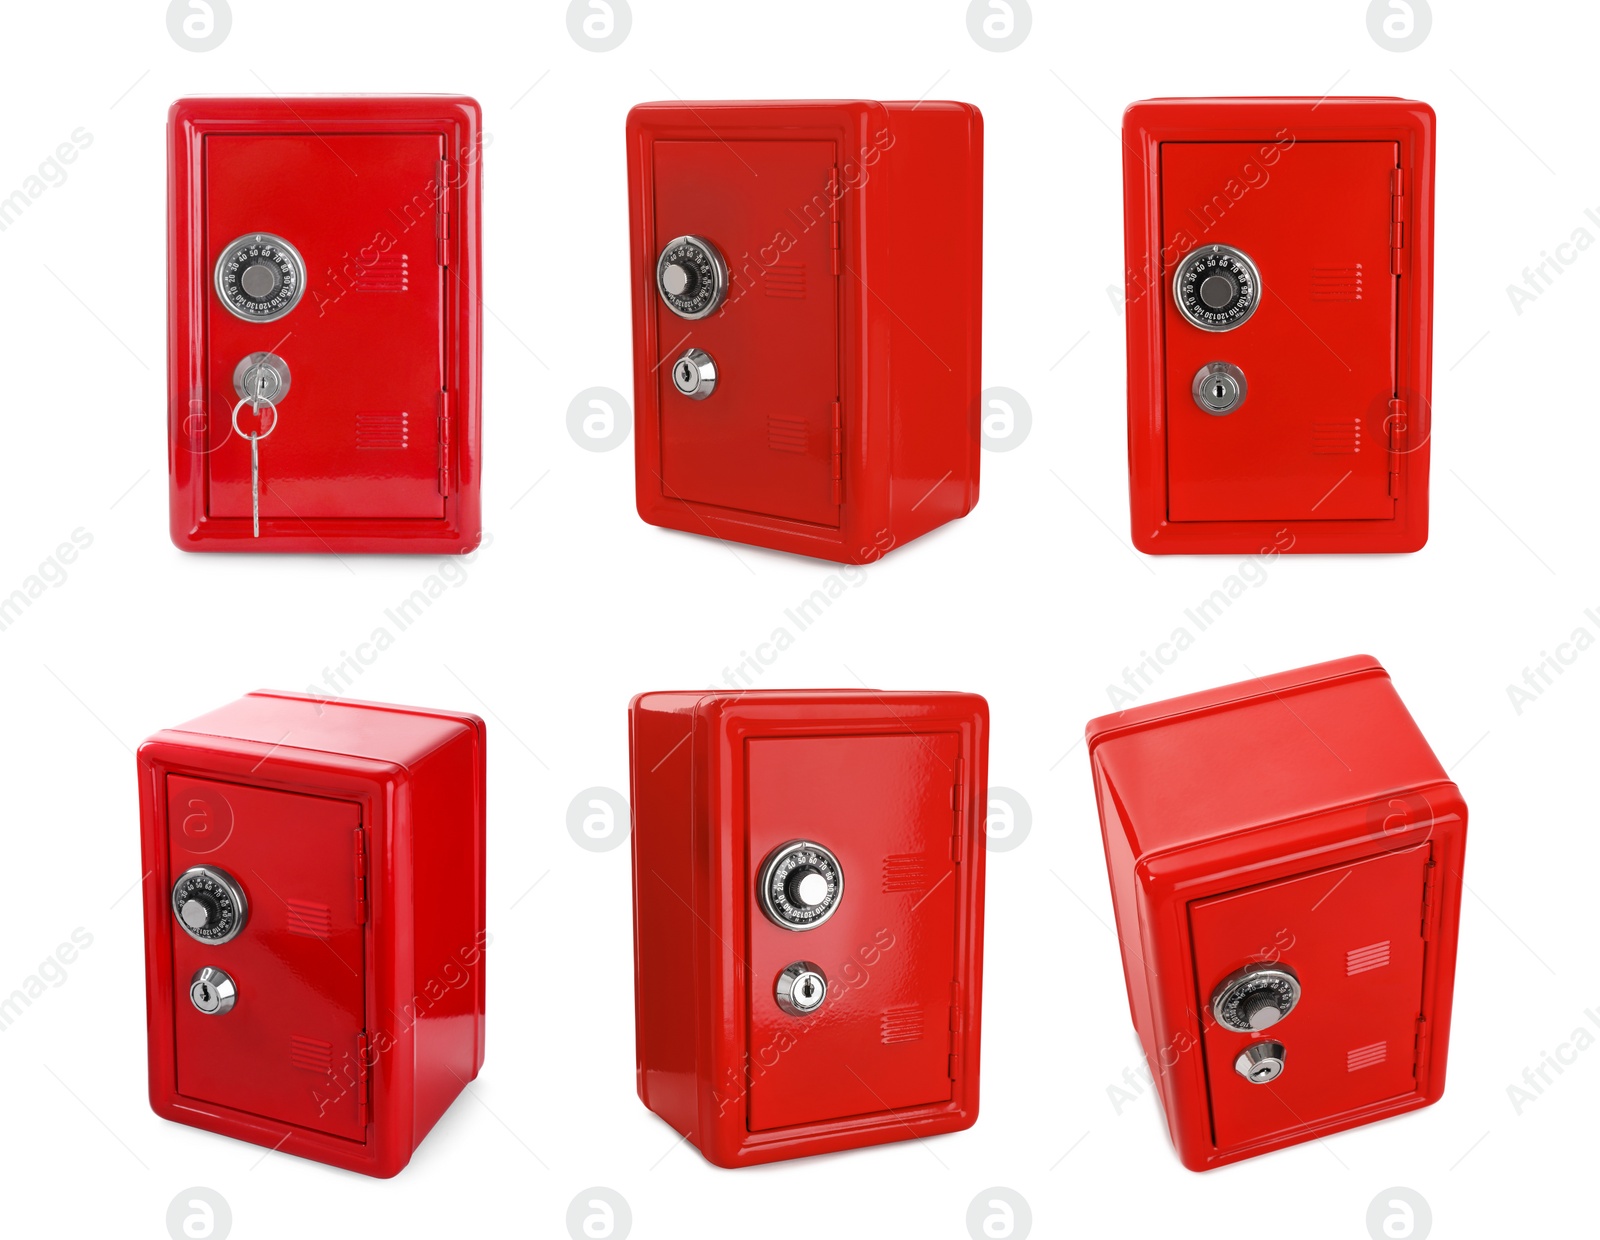 Image of Closed red steel safe on white background, view from different sides